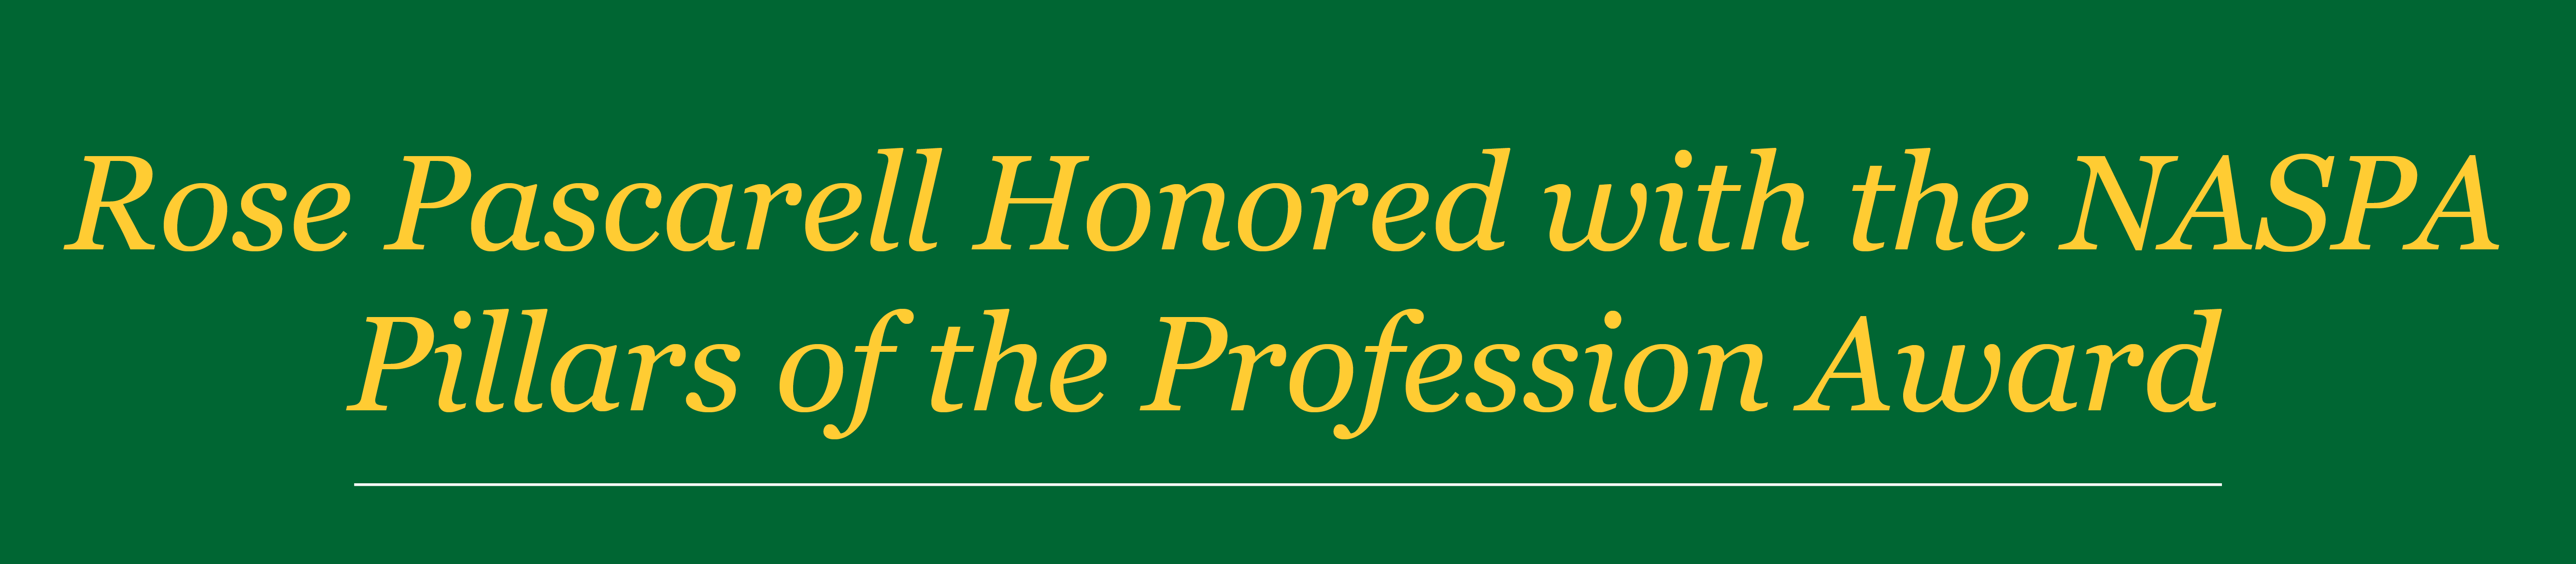 Rose Pascarell Honored with the NASPA Pillars of the Profession Award Header